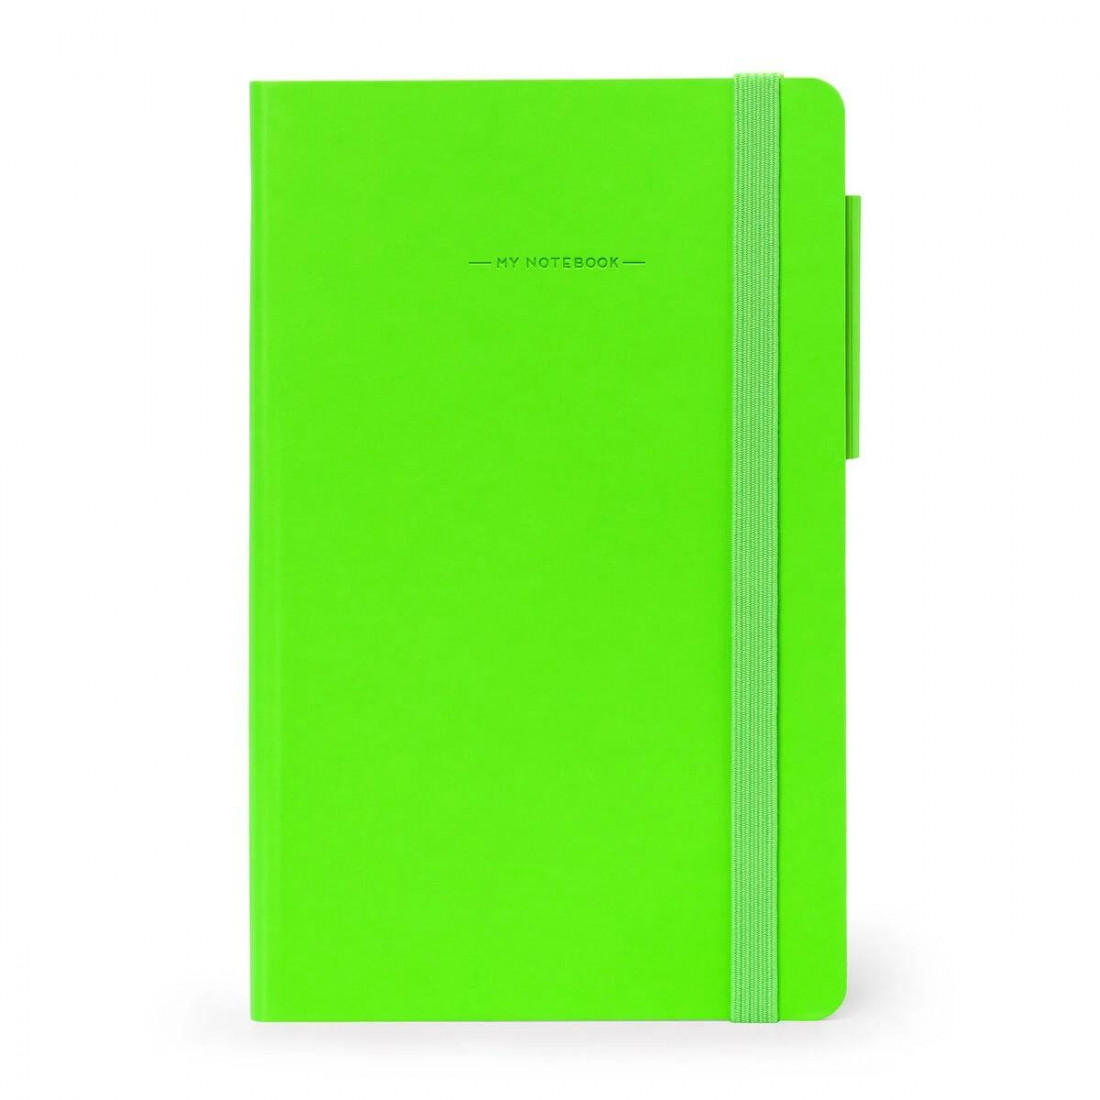 My Notebook - Lined - Medium - Neon Green Cover LEGAMI